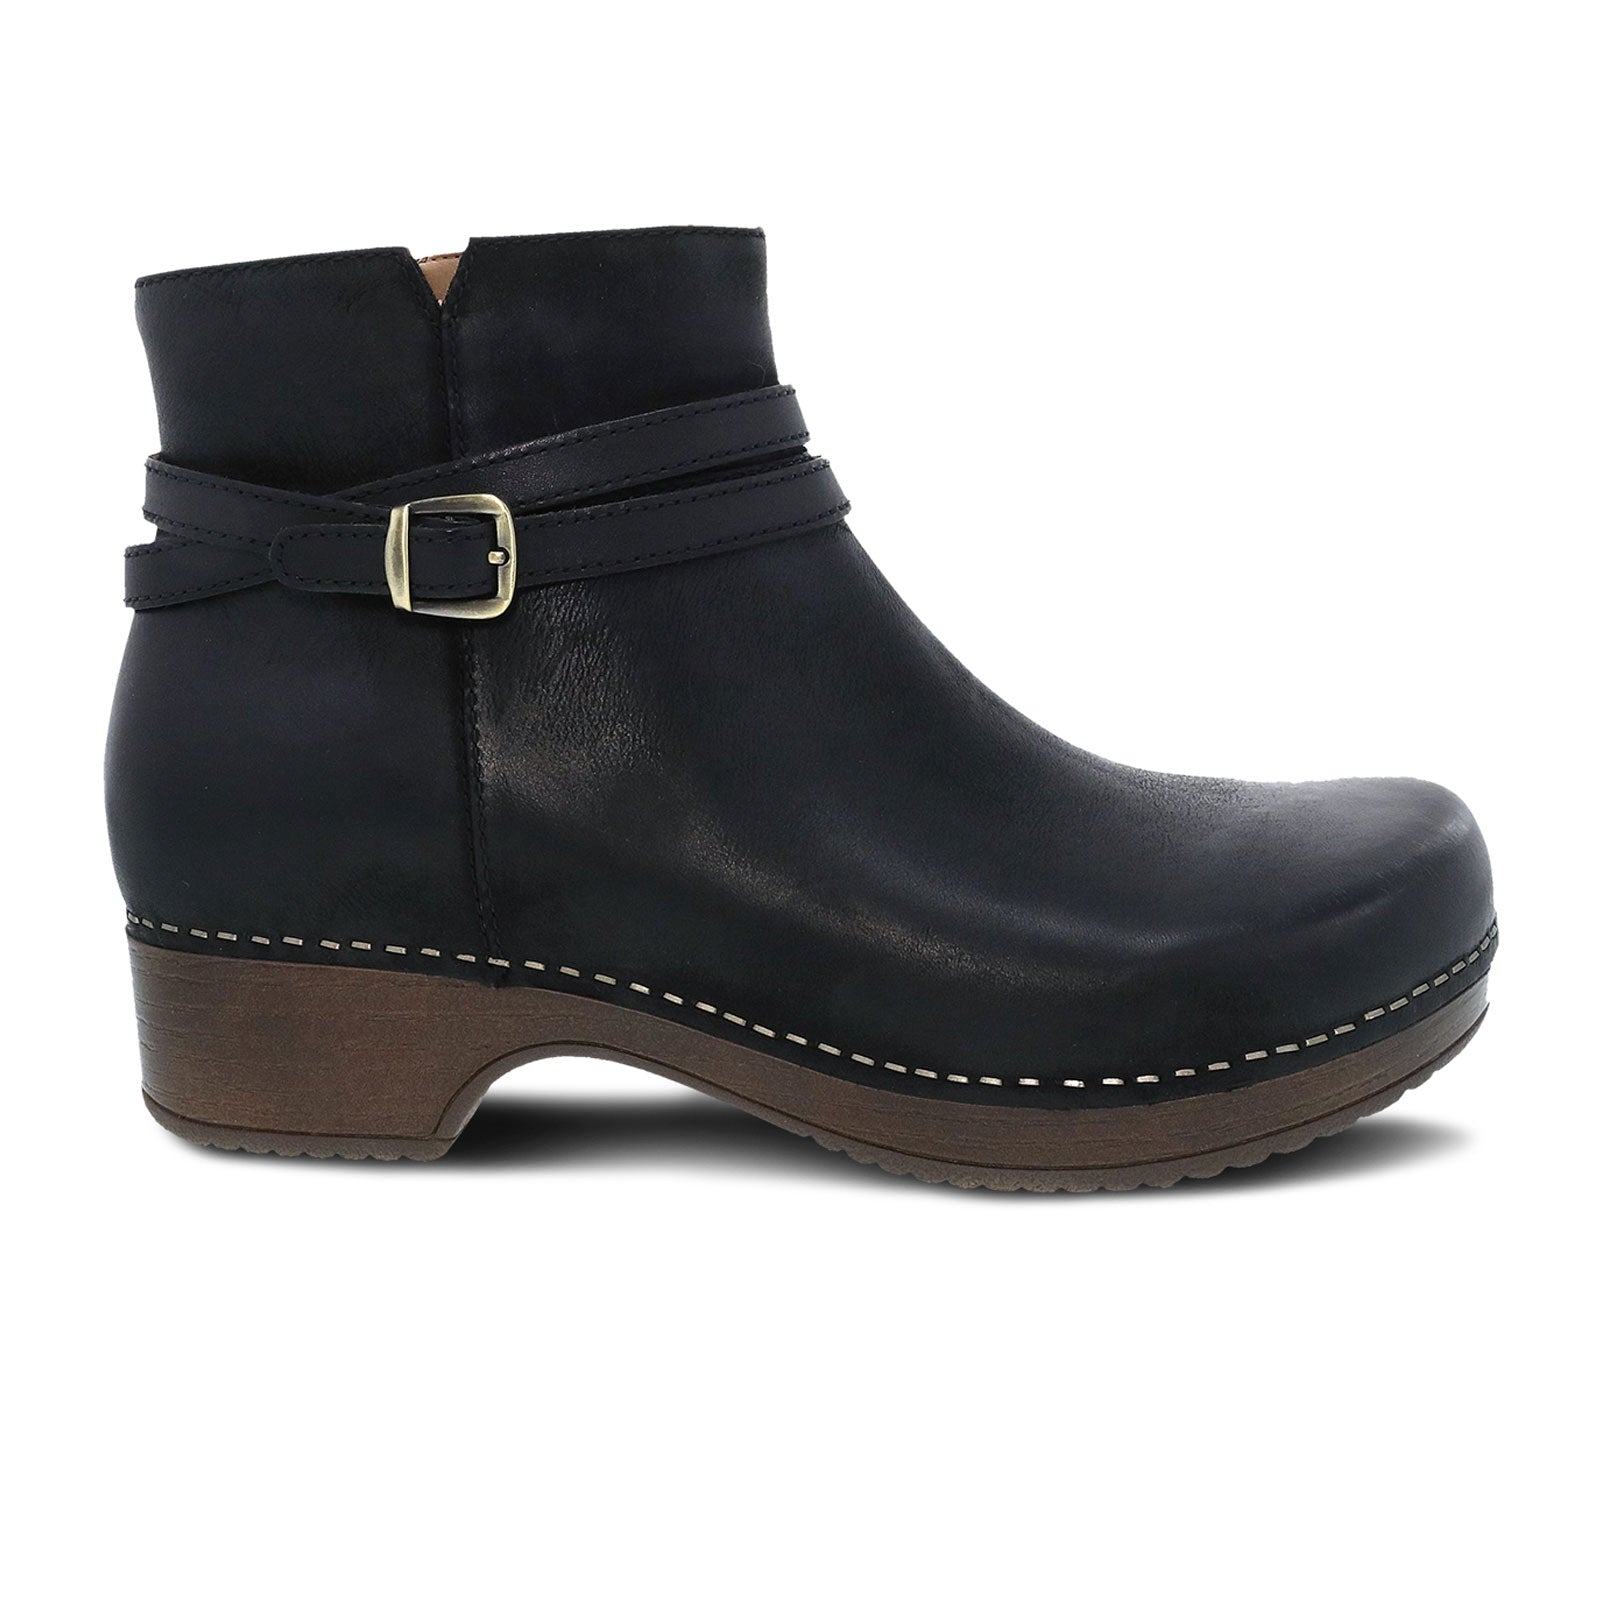 Dansko Brook Ankle Boot (Women) - Black Burnished Nubuck Boots - Fashion - Ankle Boot - The Heel Shoe Fitters